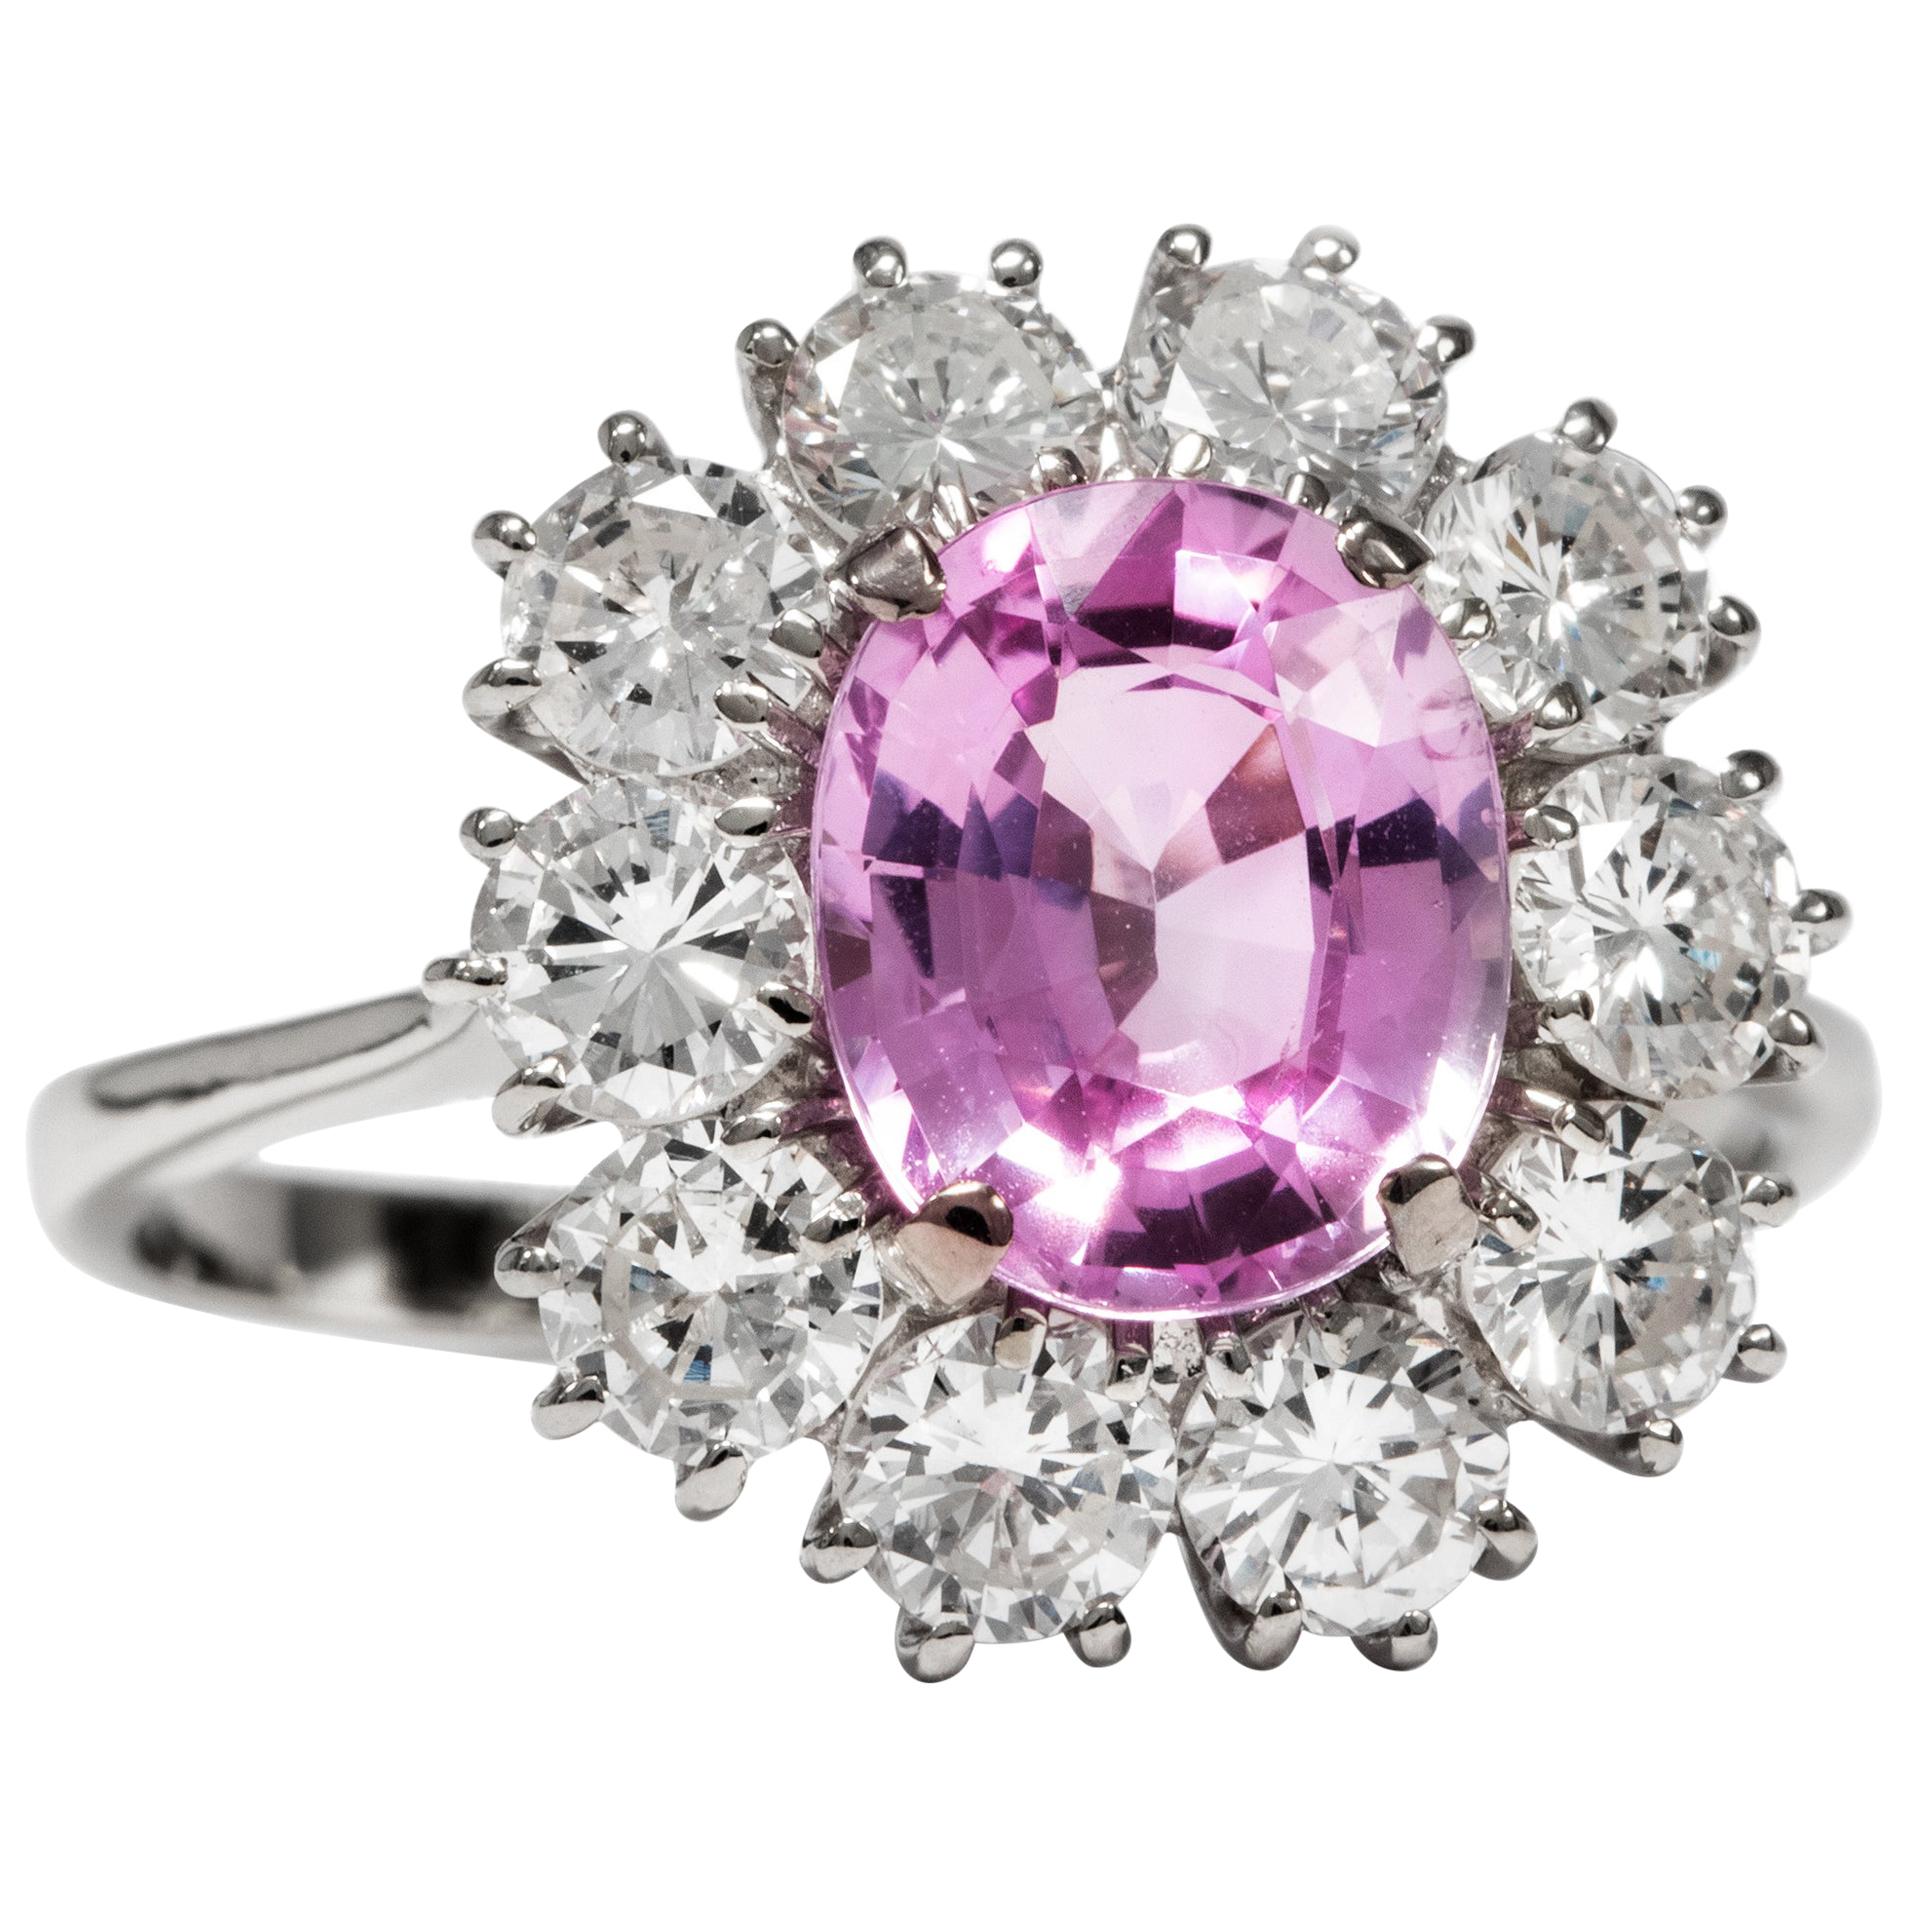 Vintage circa 1970 Certified No Heat 2.81 Carat Pink Sapphire Cluster Ring For Sale